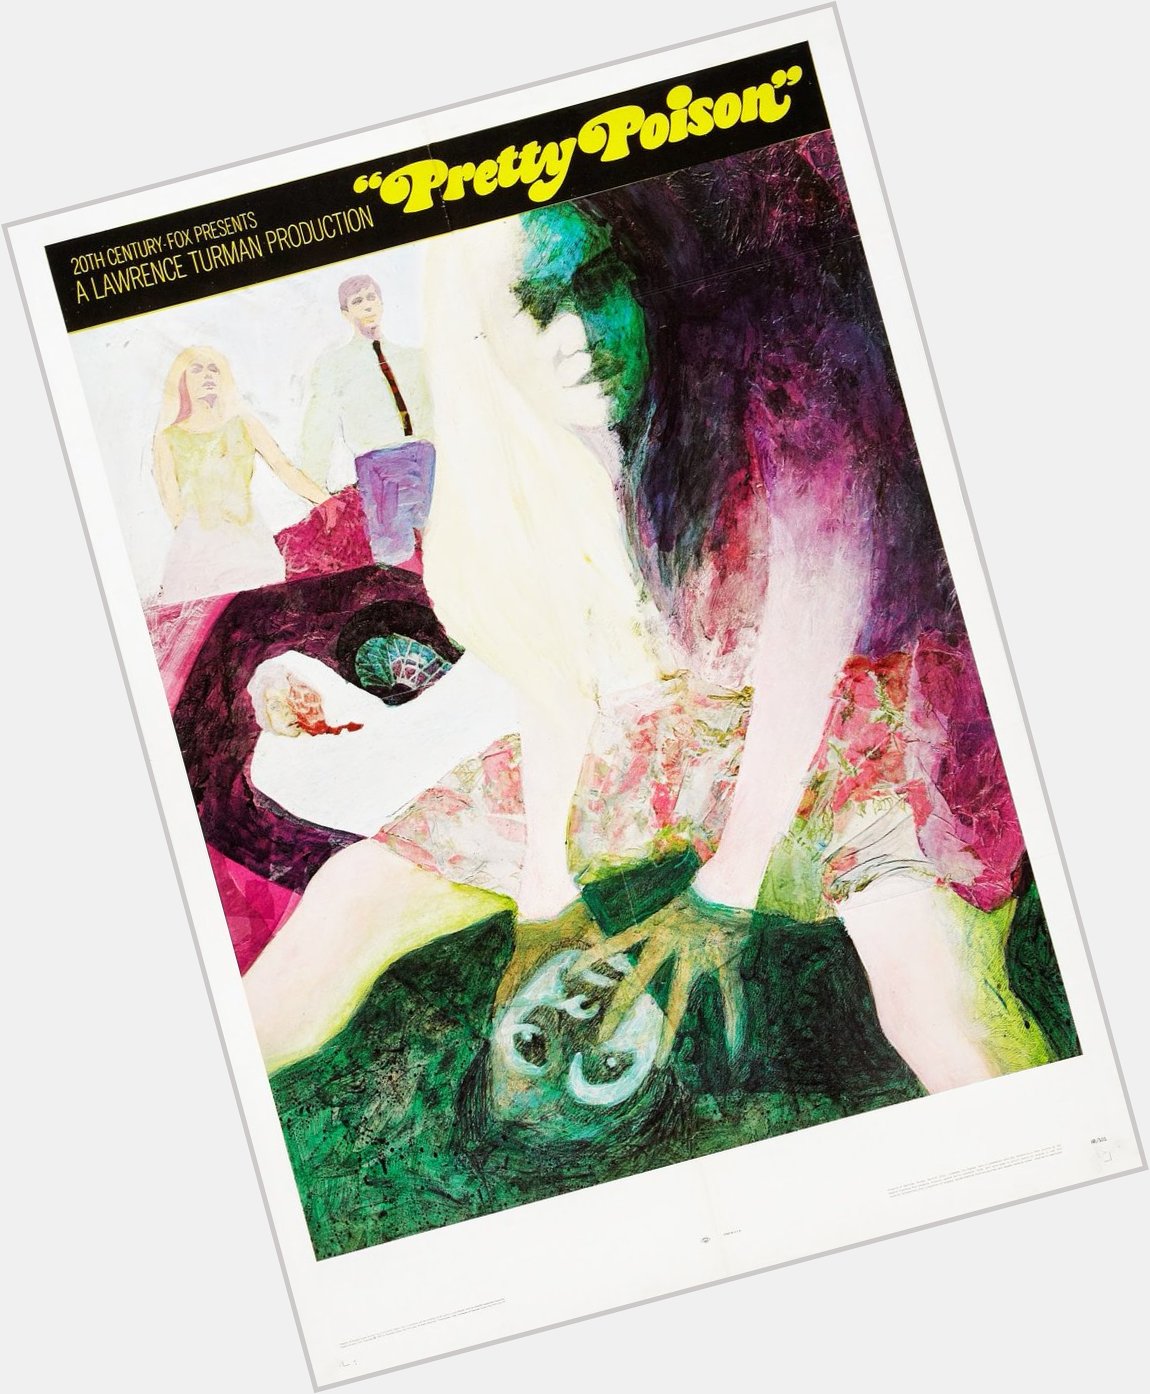 Happy birthday to Tuesday Weld - Teaser poster for the amazing PRETTY POISON - 1968 